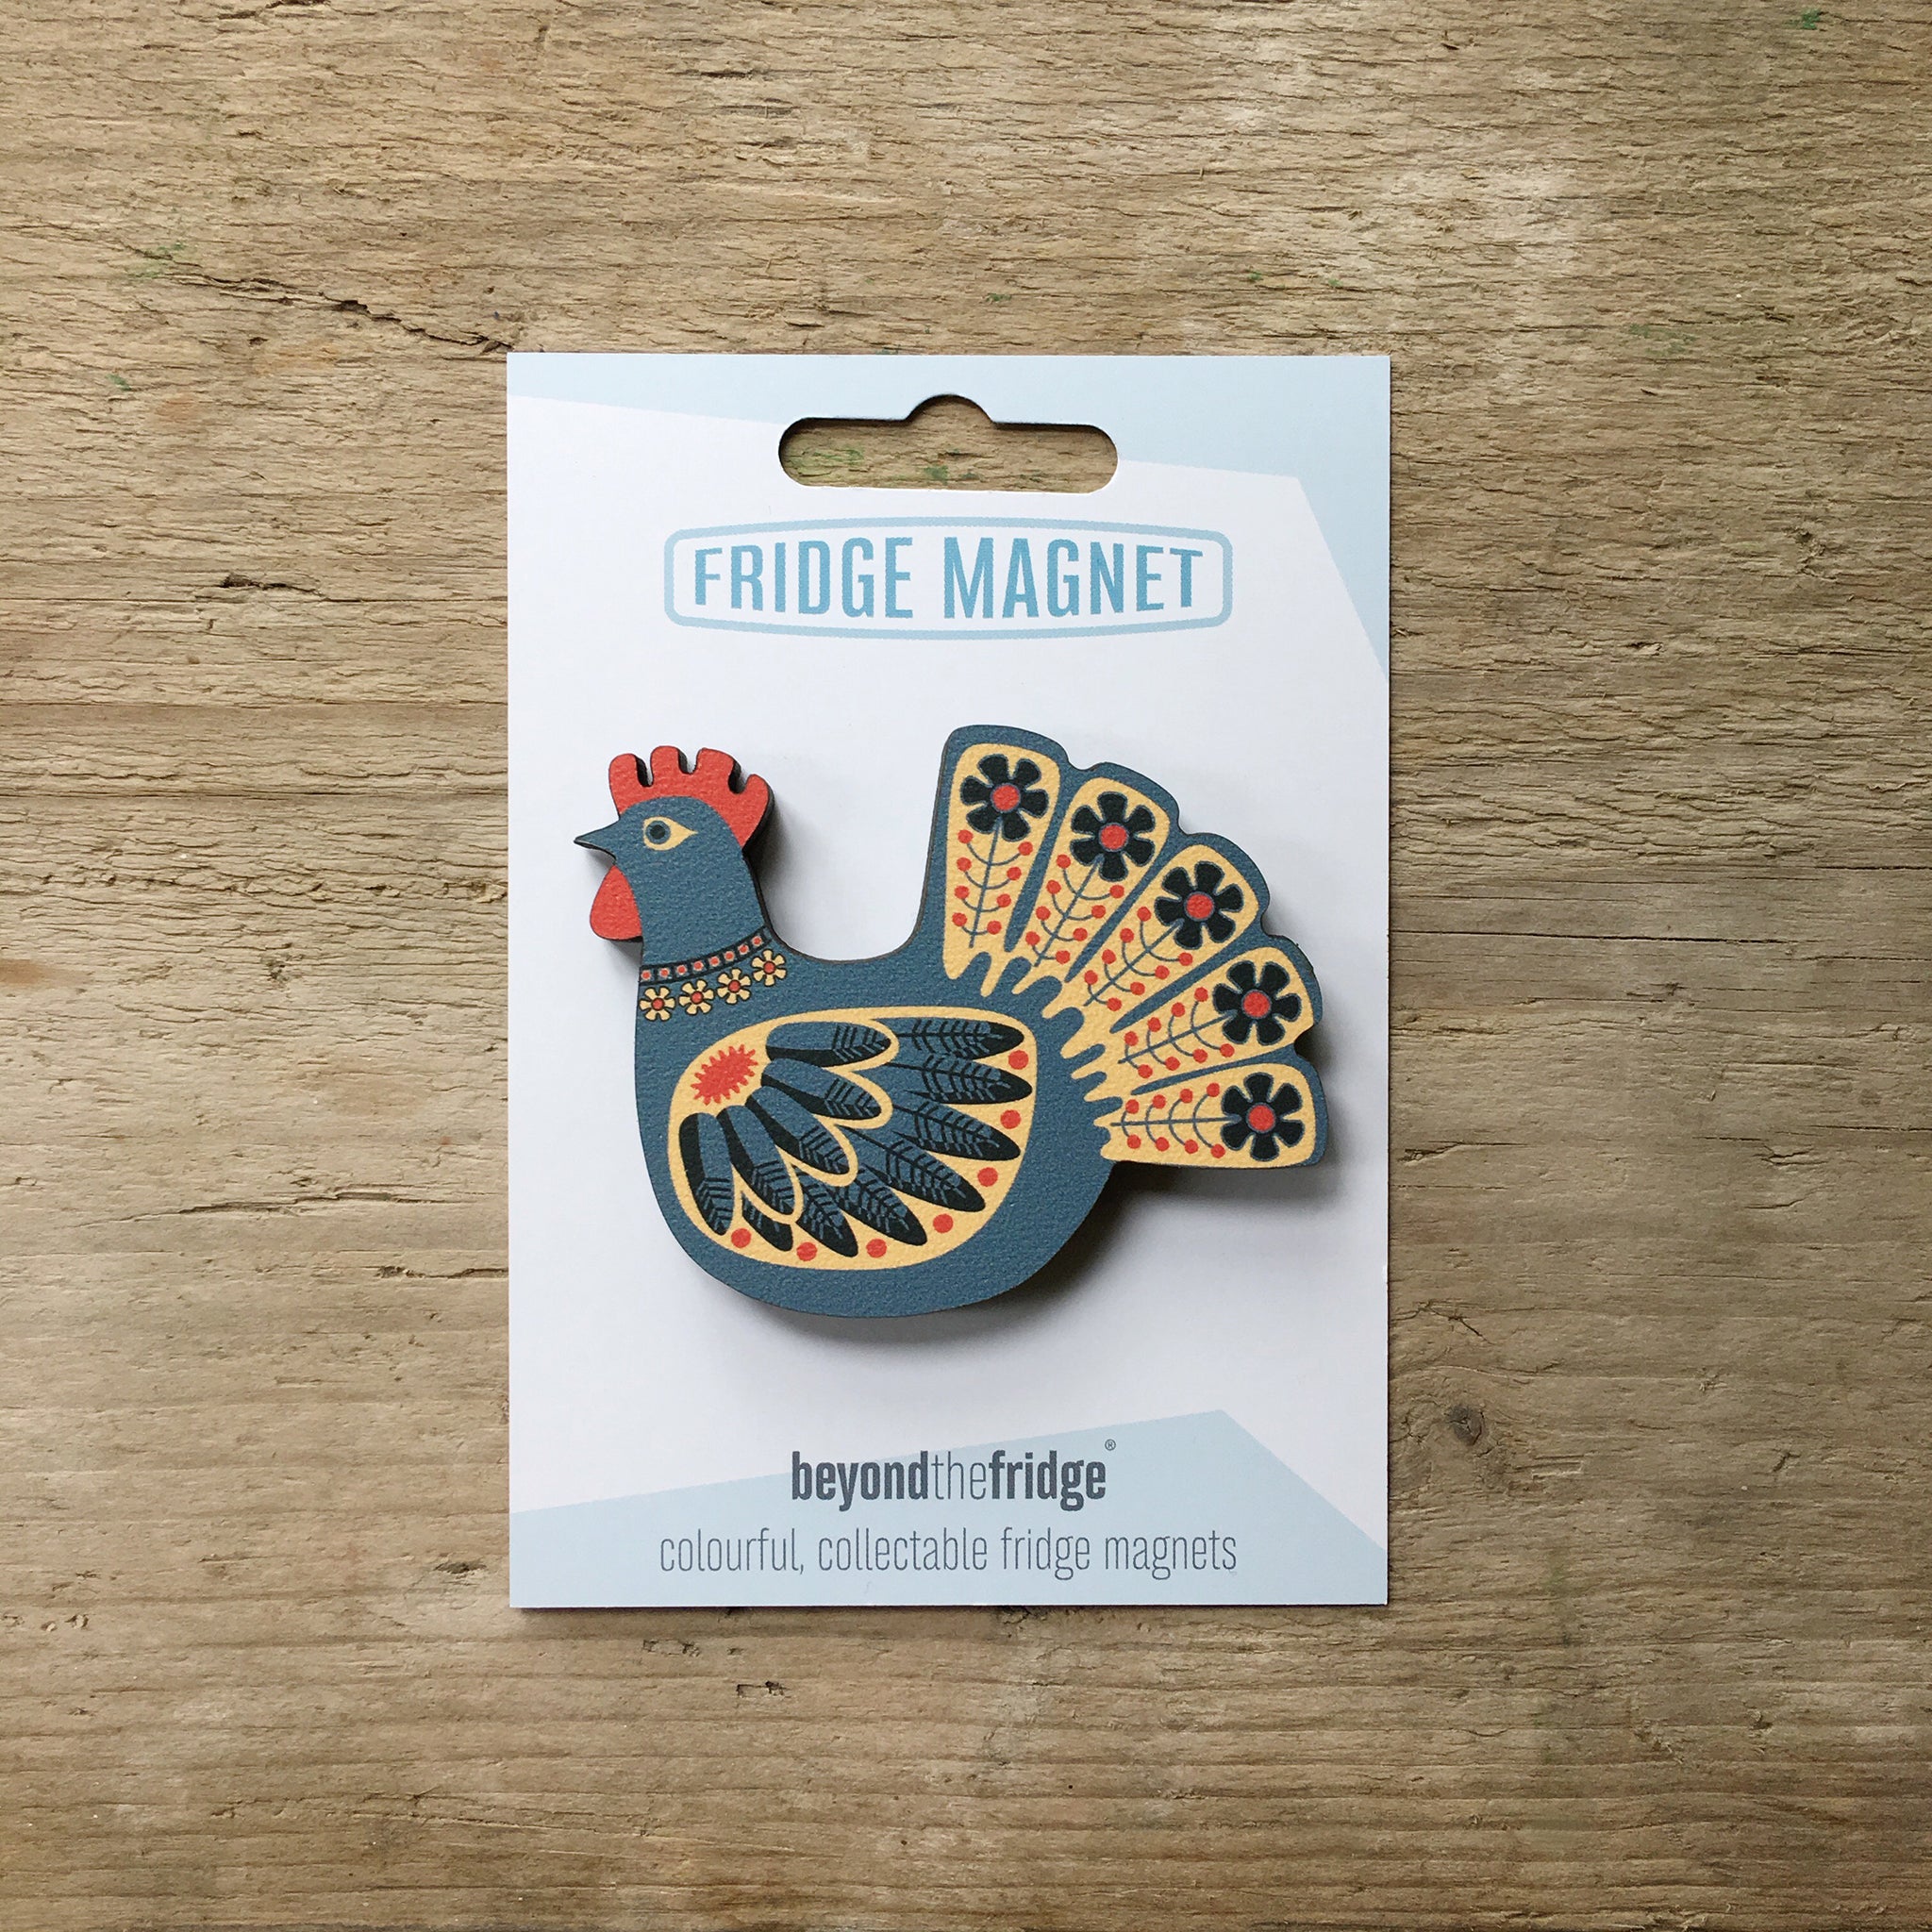 A blue hen design plywood fridge magnet by Beyond the Fridge in it’s pack on a wooden background